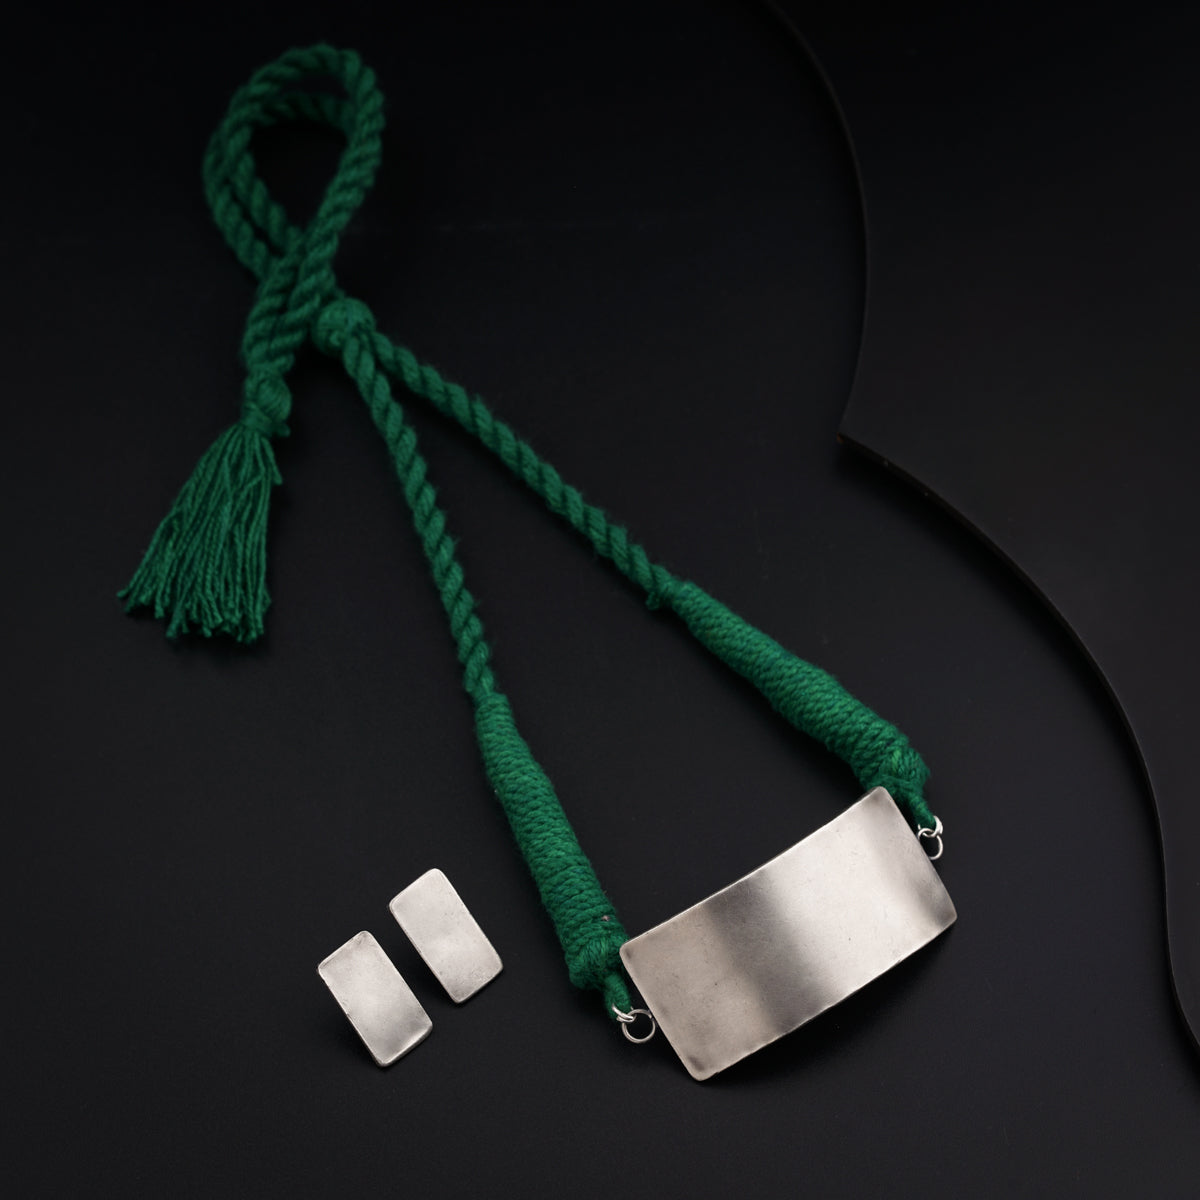 a green cord with a metal tag attached to it